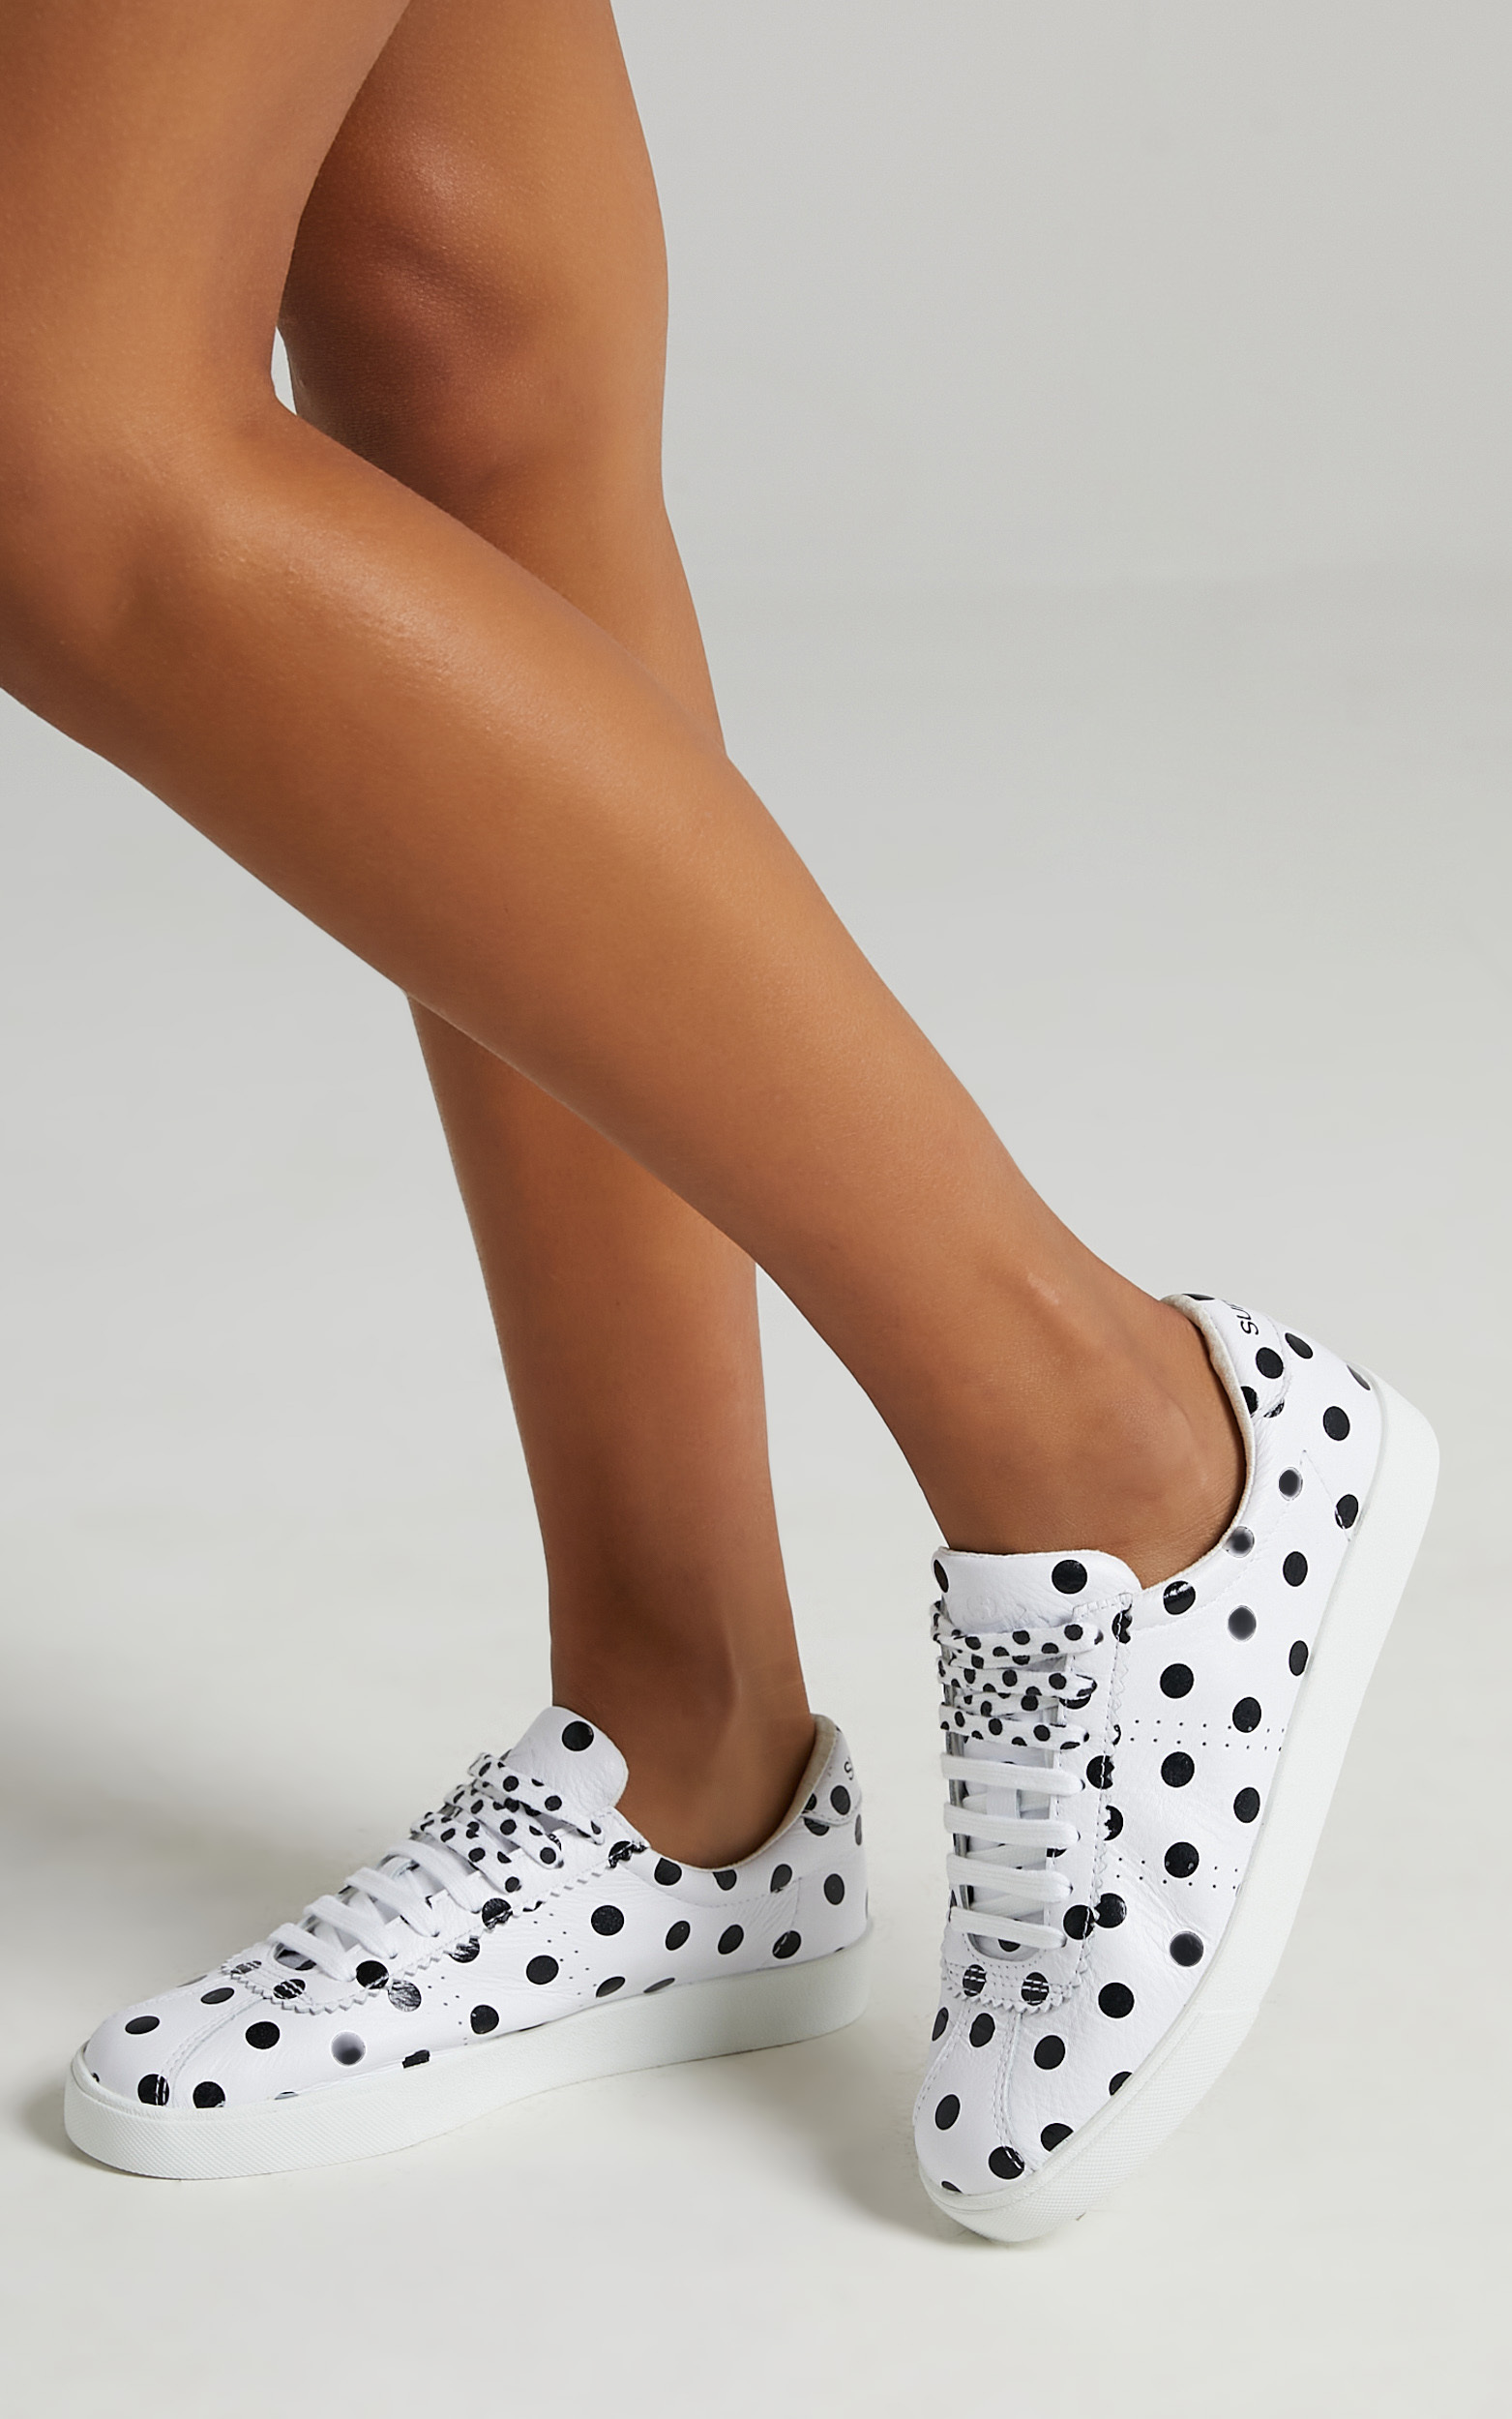 Superga - 2843 Club S Leather Print Sneakers in A5S White Dots Black - 05, WHT1, hi-res image number null